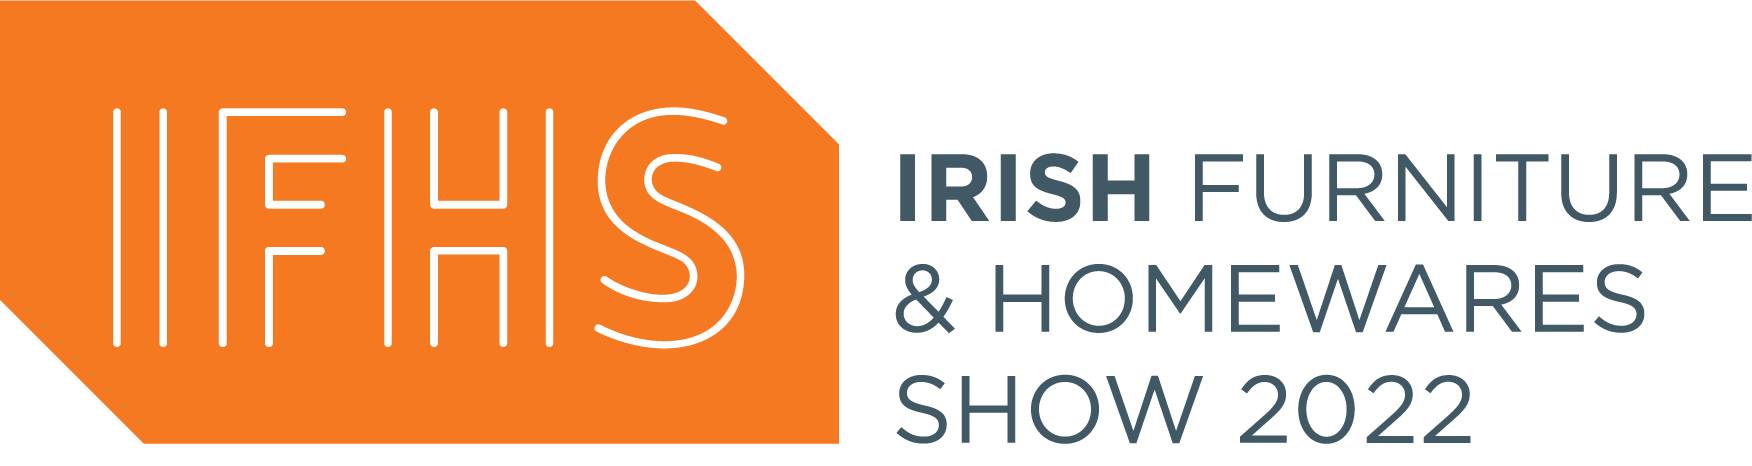 Visit Derry's at JFS 2019 - IFHS Tradeshow